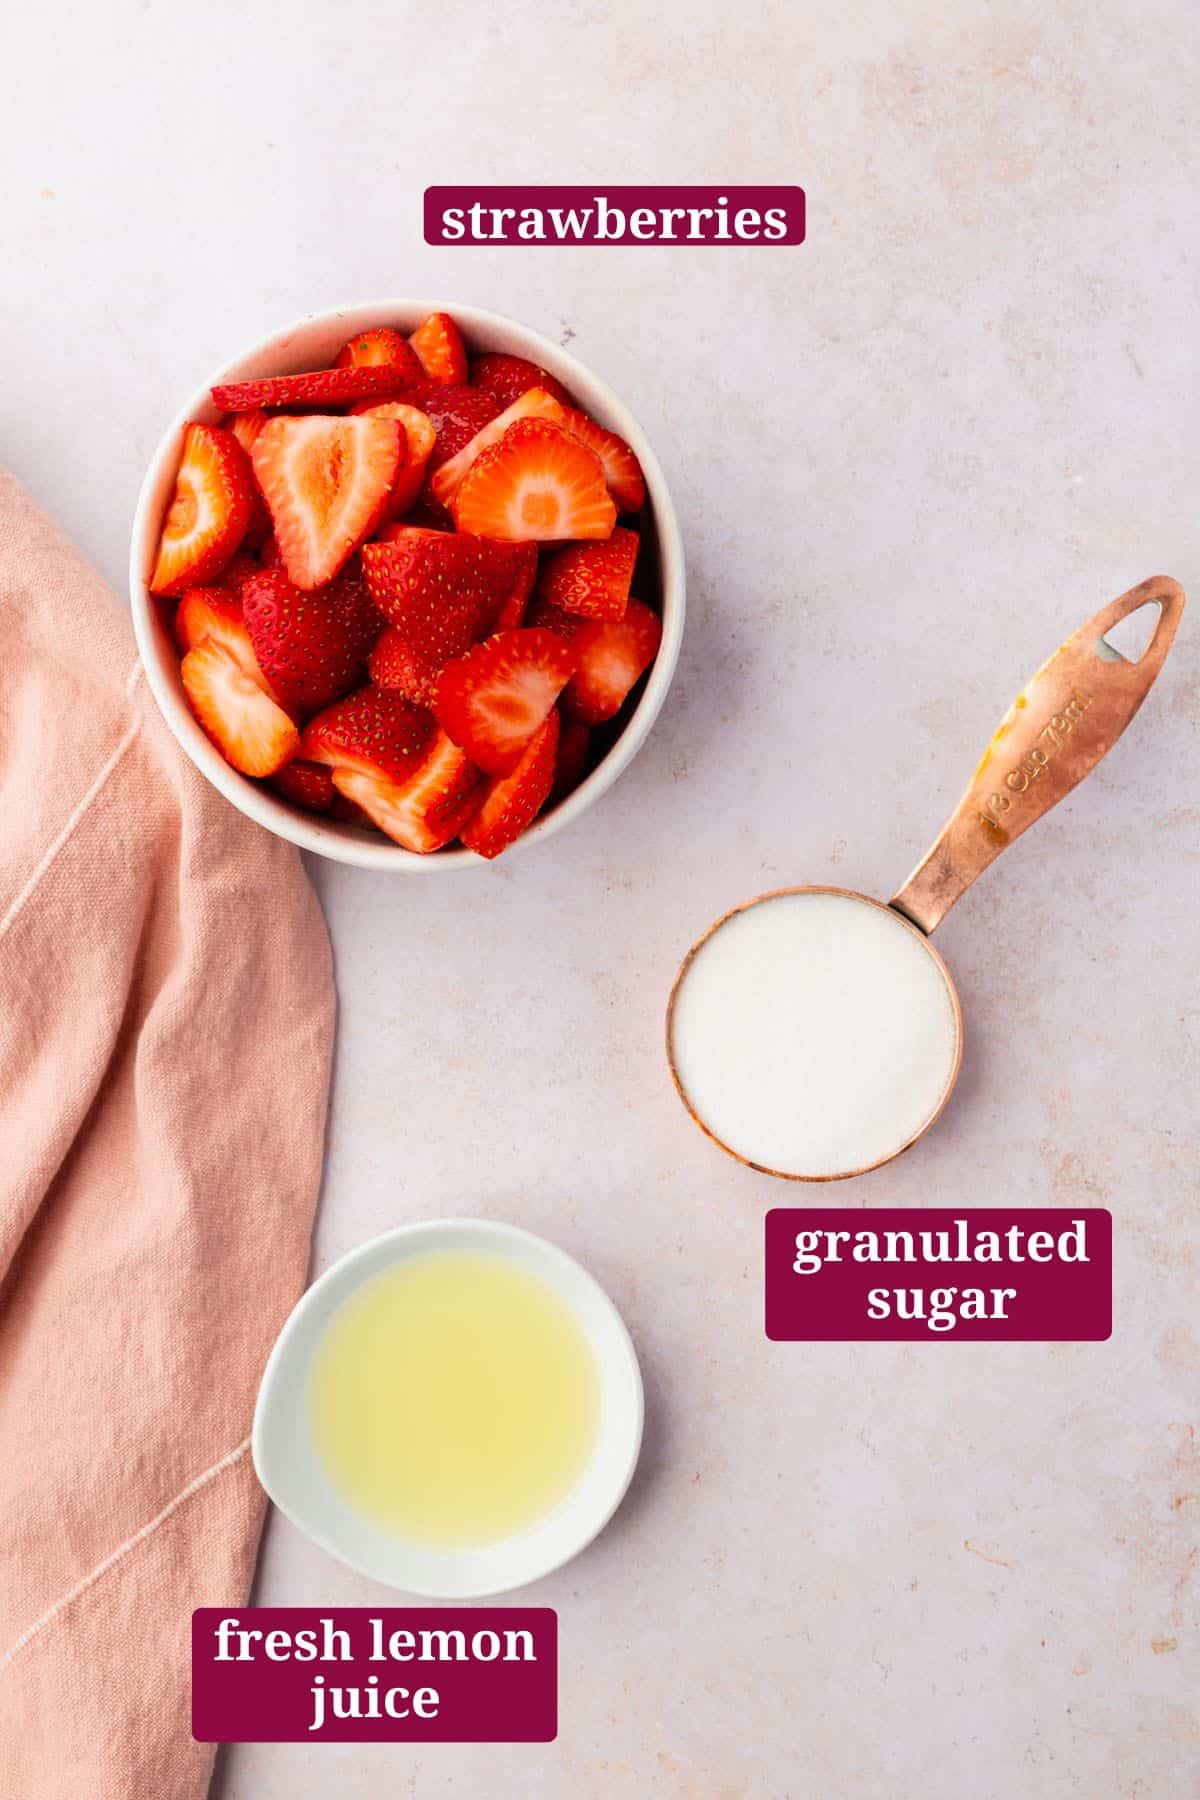 An overhead view of a bowl of sliced strawberries, a small bowl of lemon juice, and a measuring cup of granulated sugar with text overlays over each ingredient.